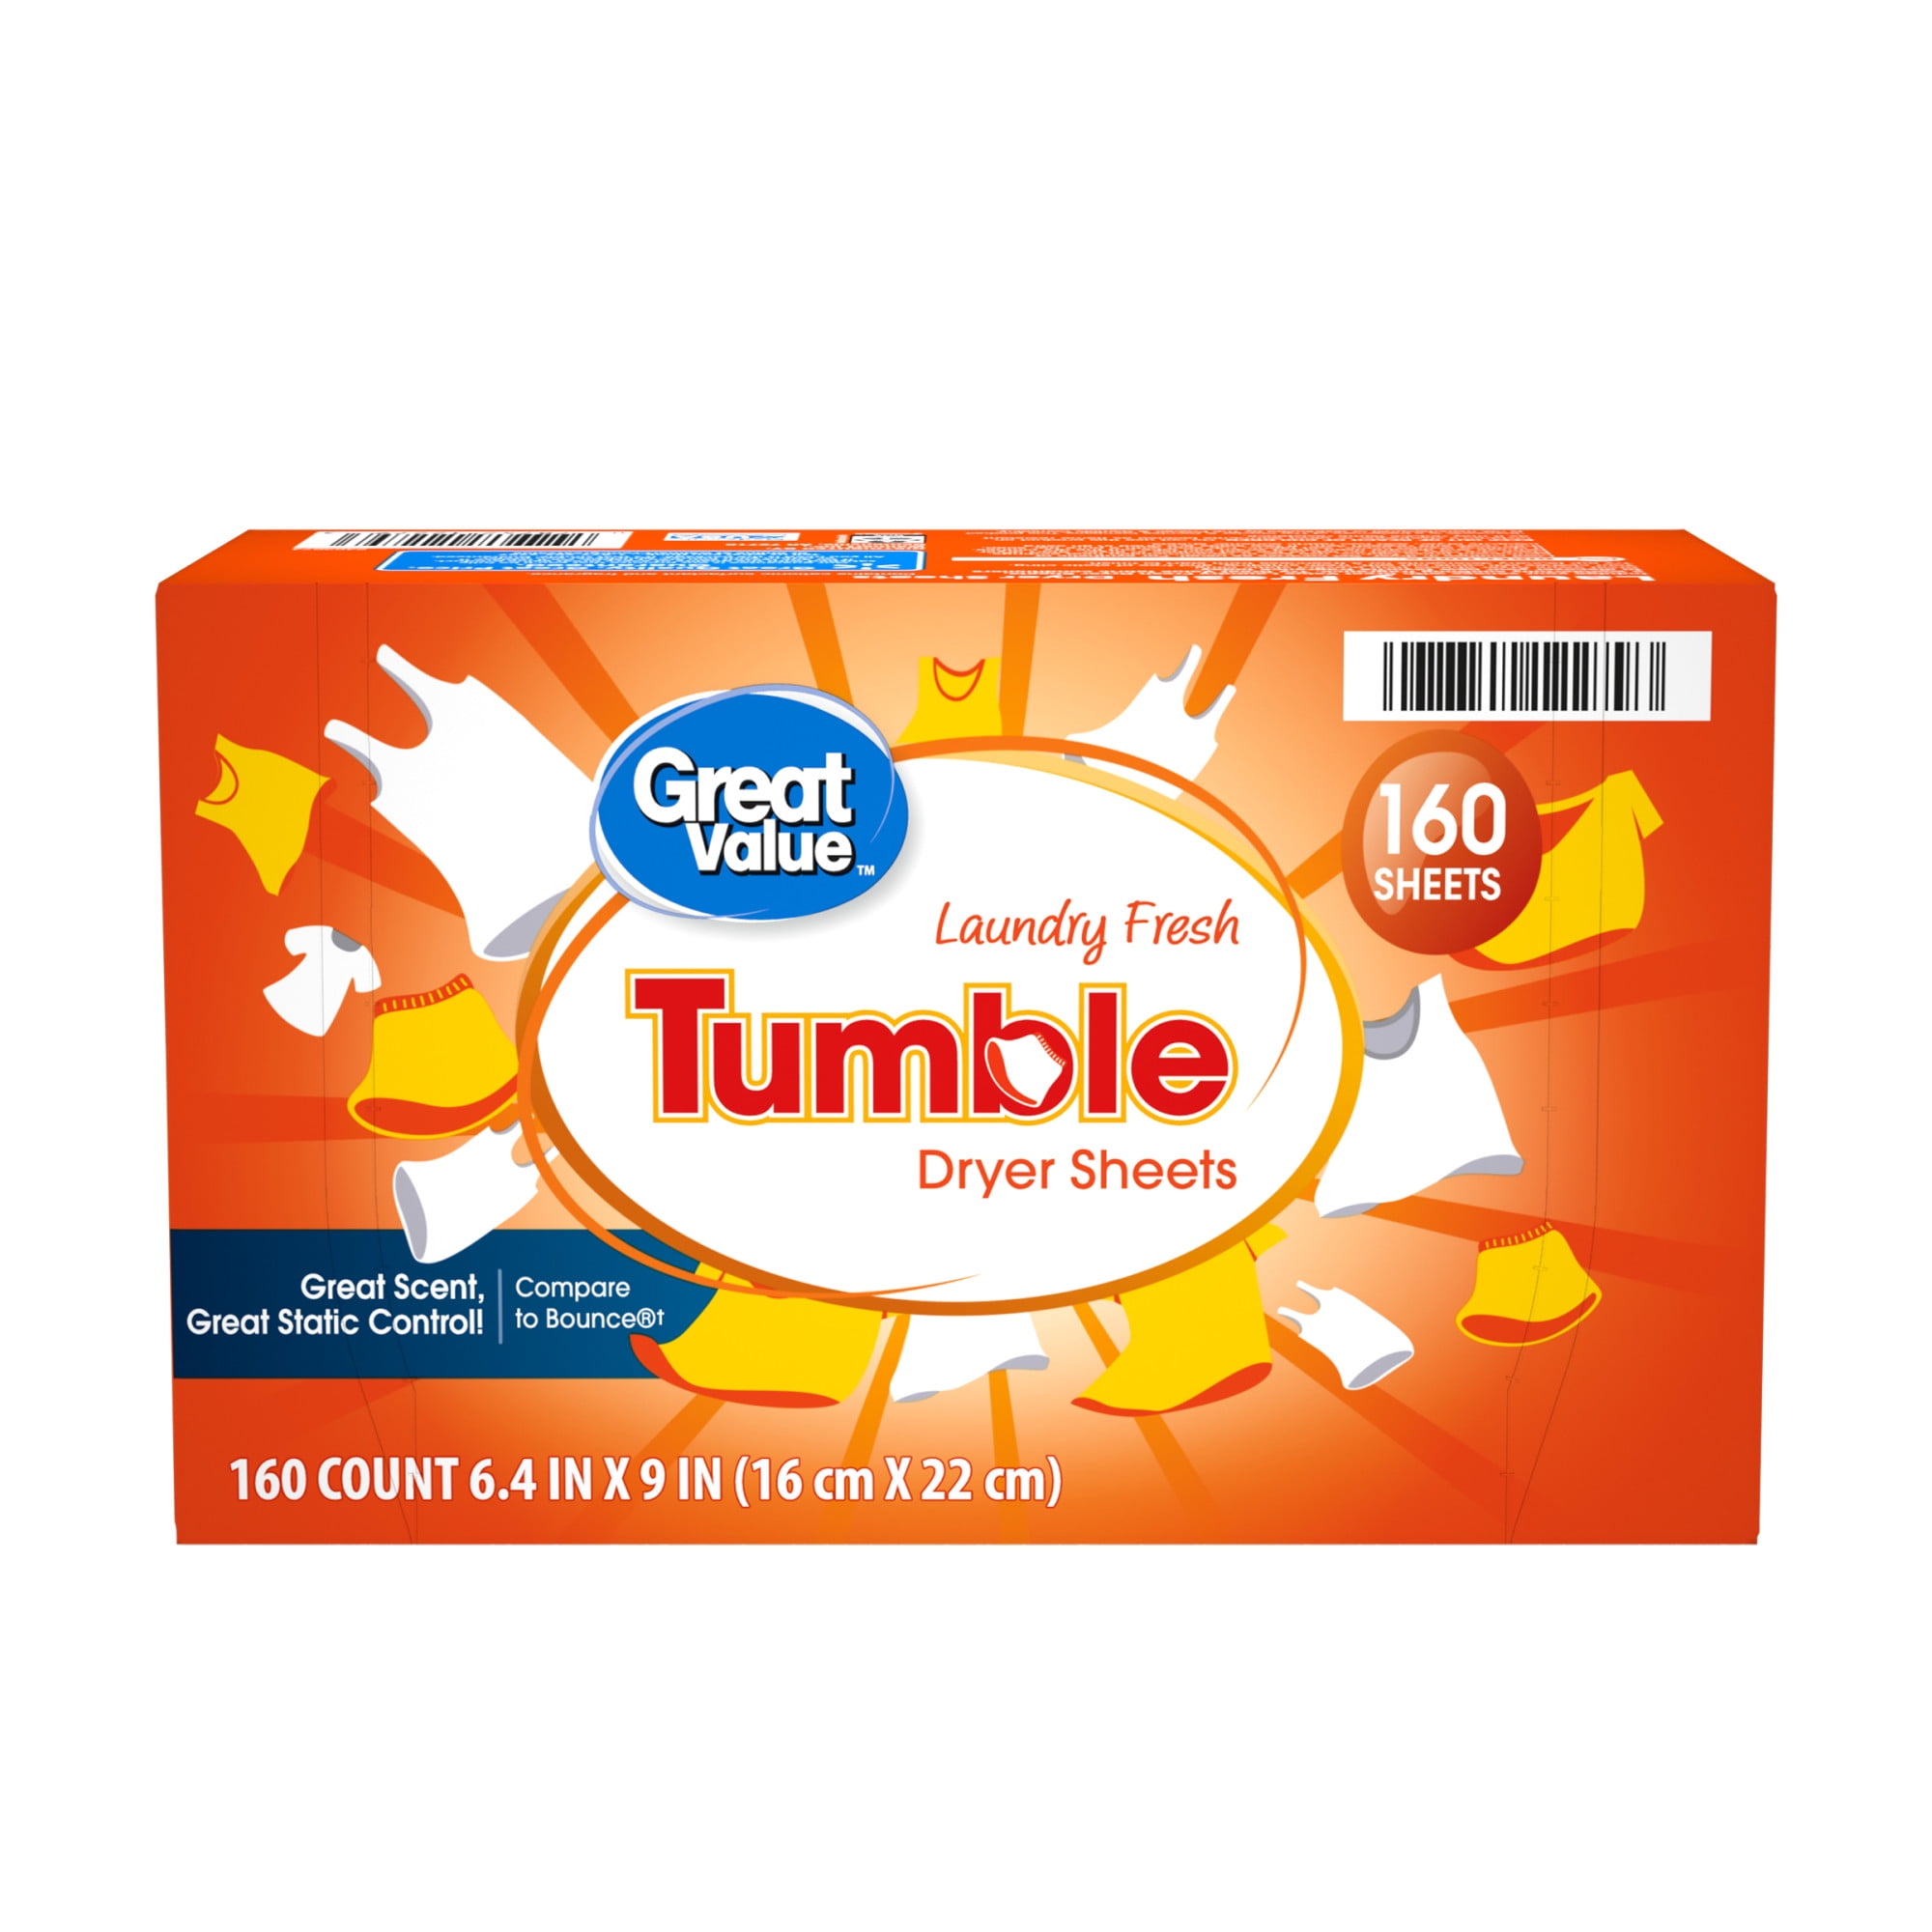 Great Value Tumble Dryer Sheets, Laundry Fresh, 160 count -